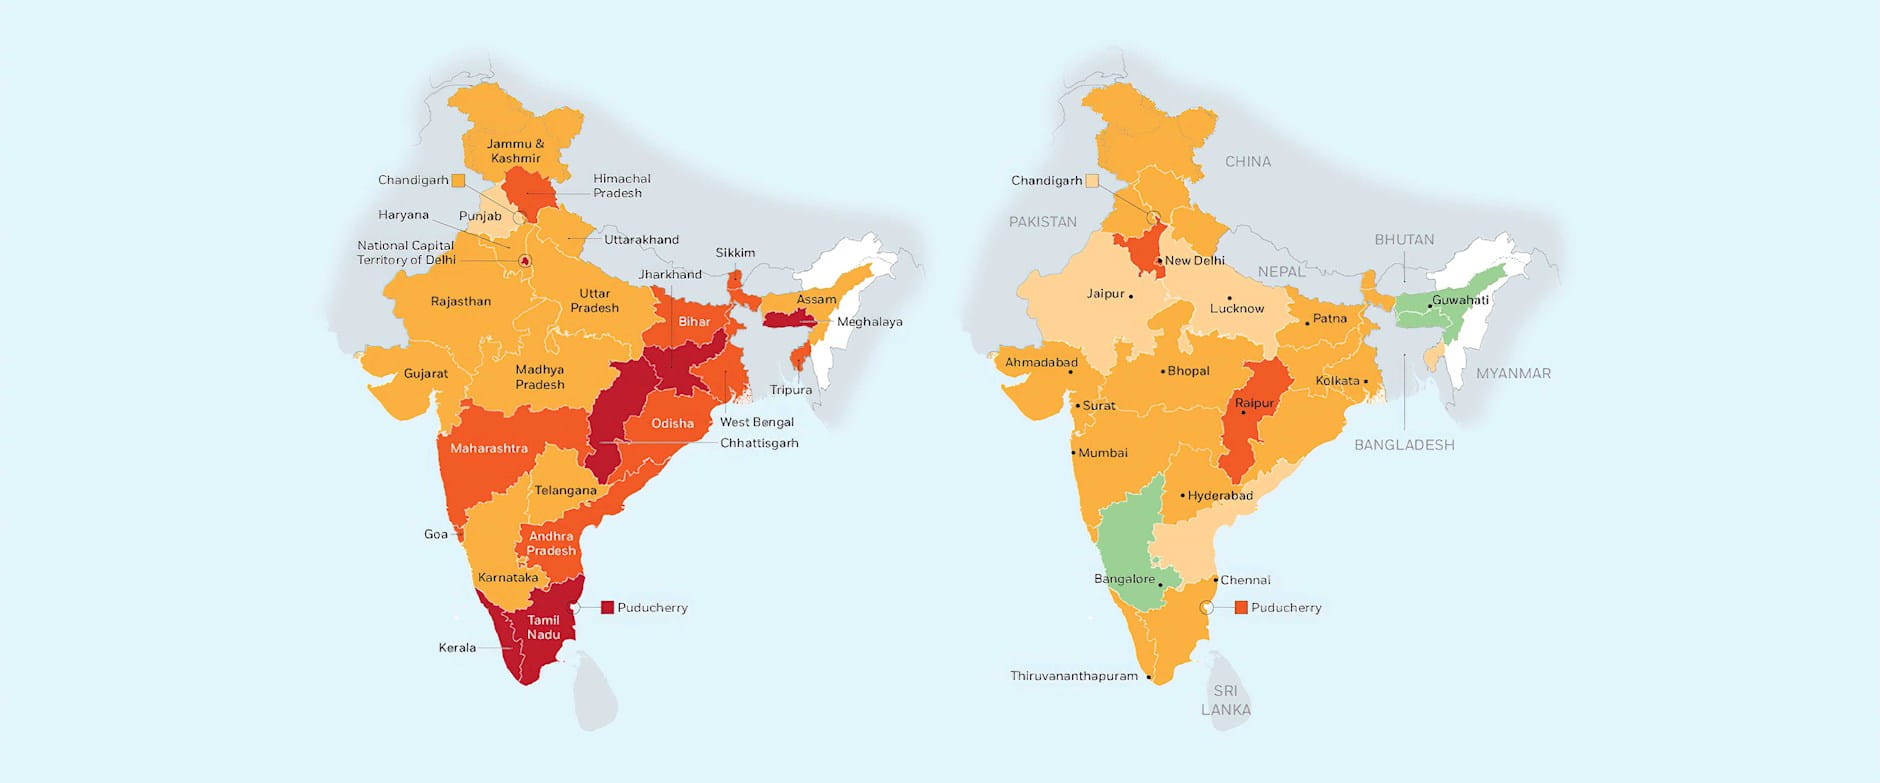 Data map of India